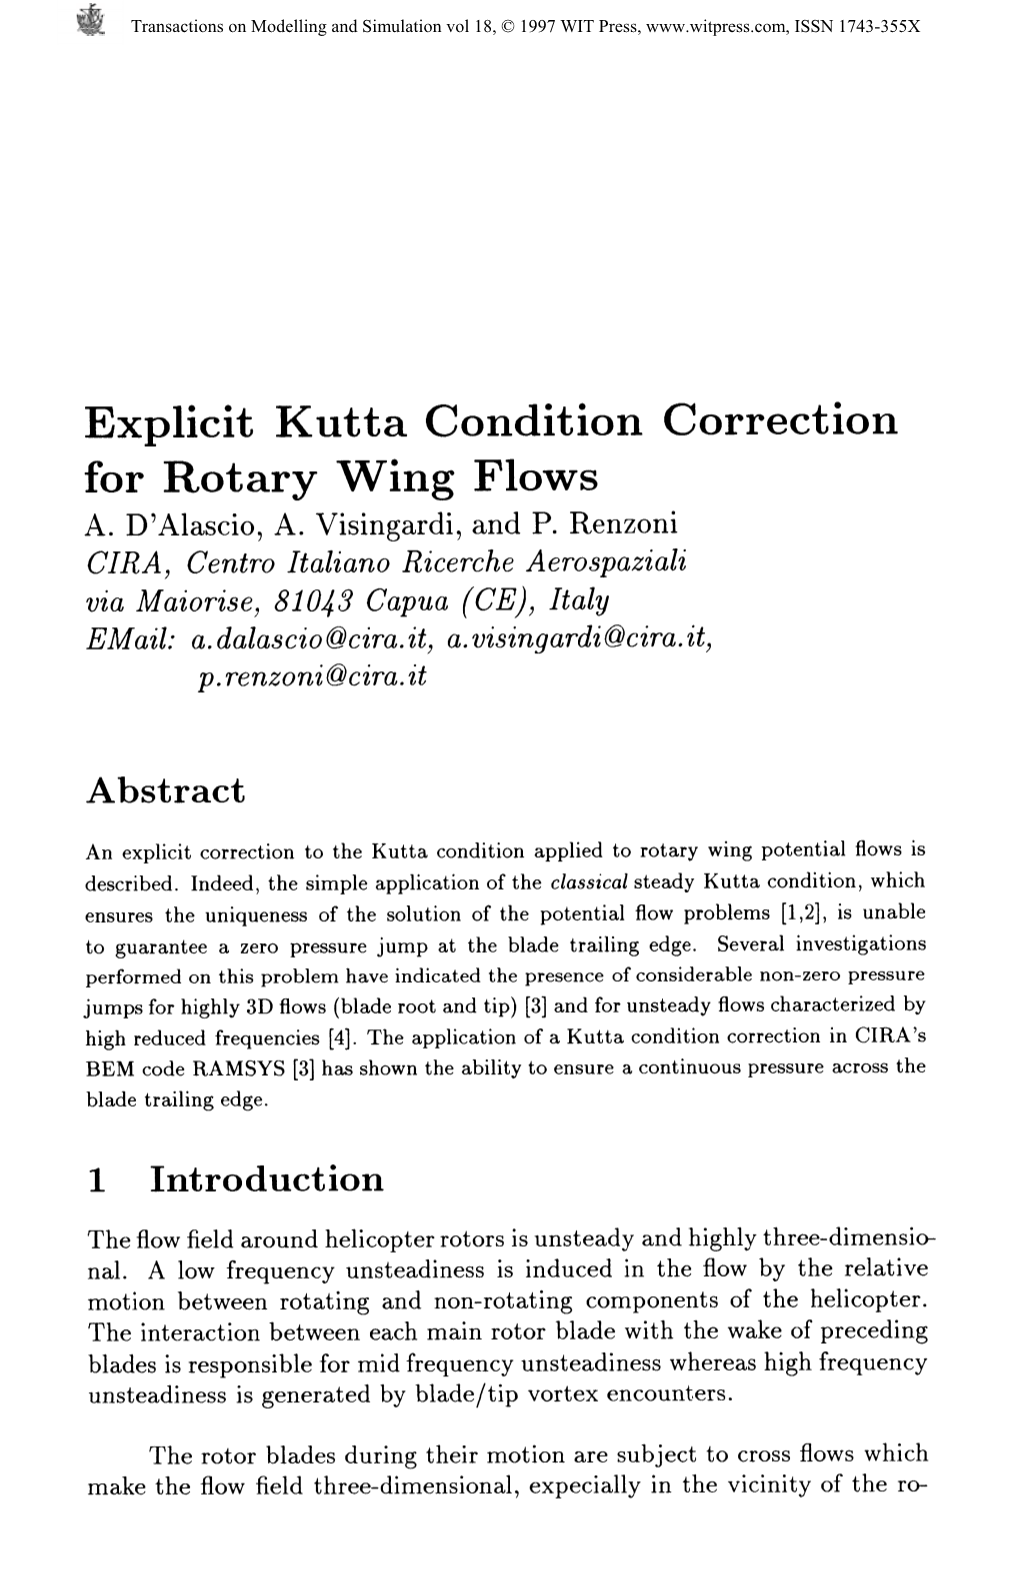 Explicit Kutta Condition Correction for Rotary Wing Flows A. D'alascio, A